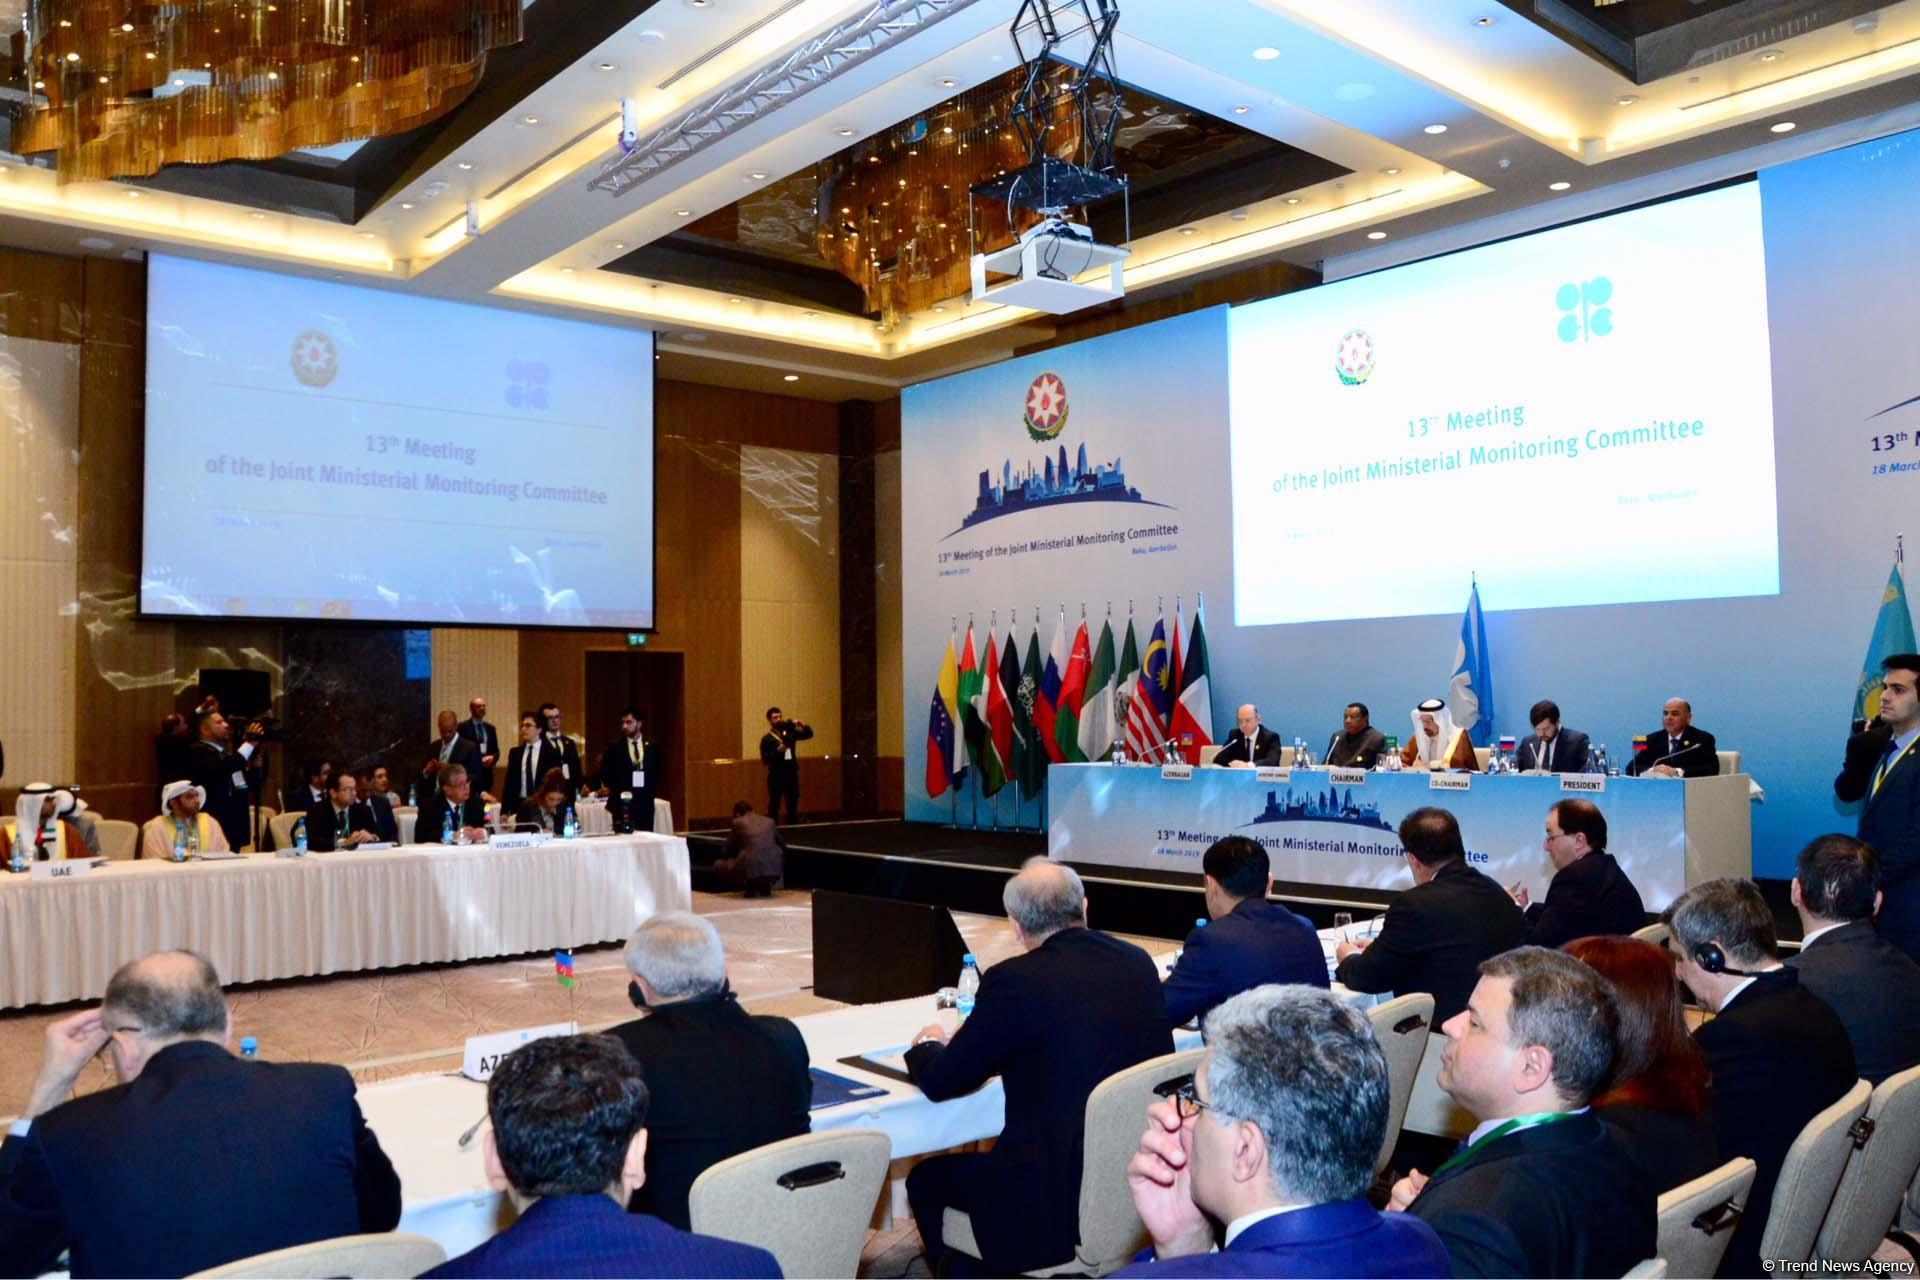 OPEC/non-OPEC Joint Ministerial Monitoring Committee meeting underway in Baku (PHOTO)